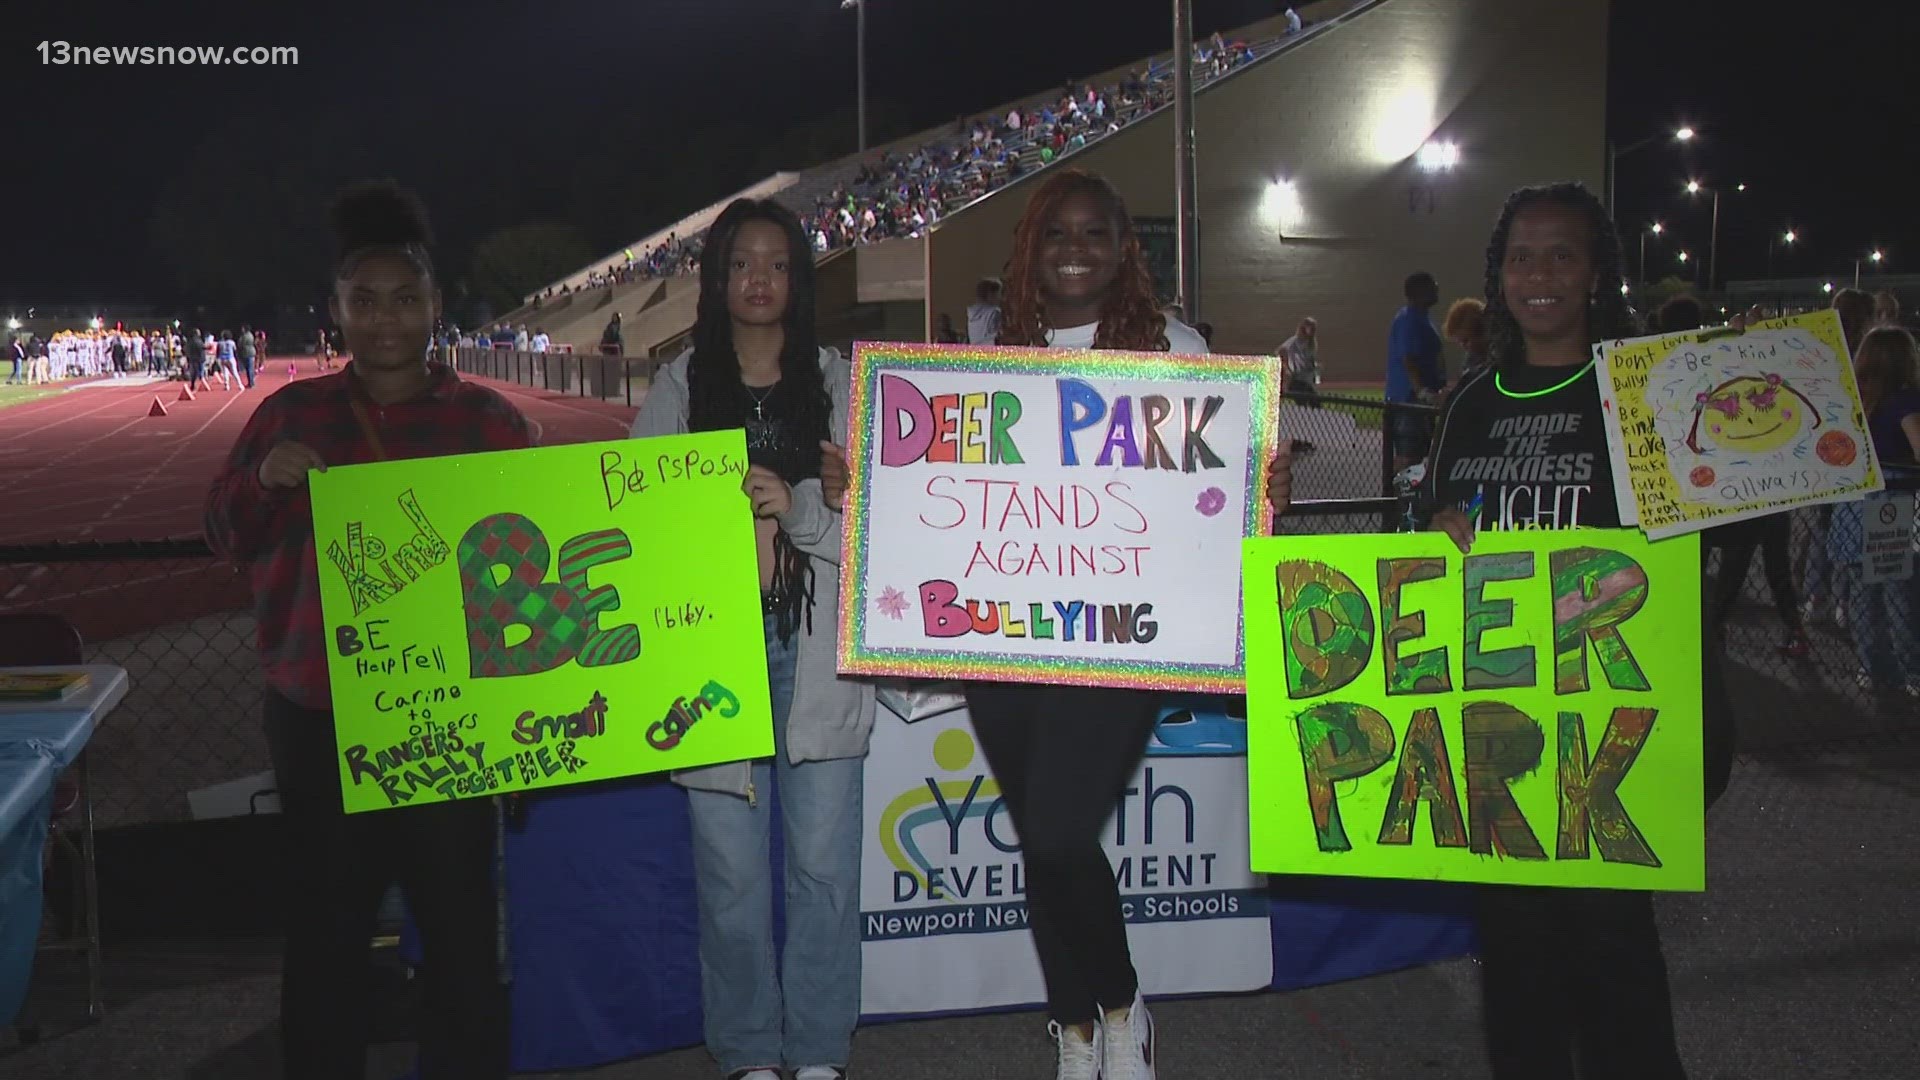 It wasn't your typical halftime show at Todd Stadium Thursday night, but a message students want to spread: “Stand Up Against Bullying.”